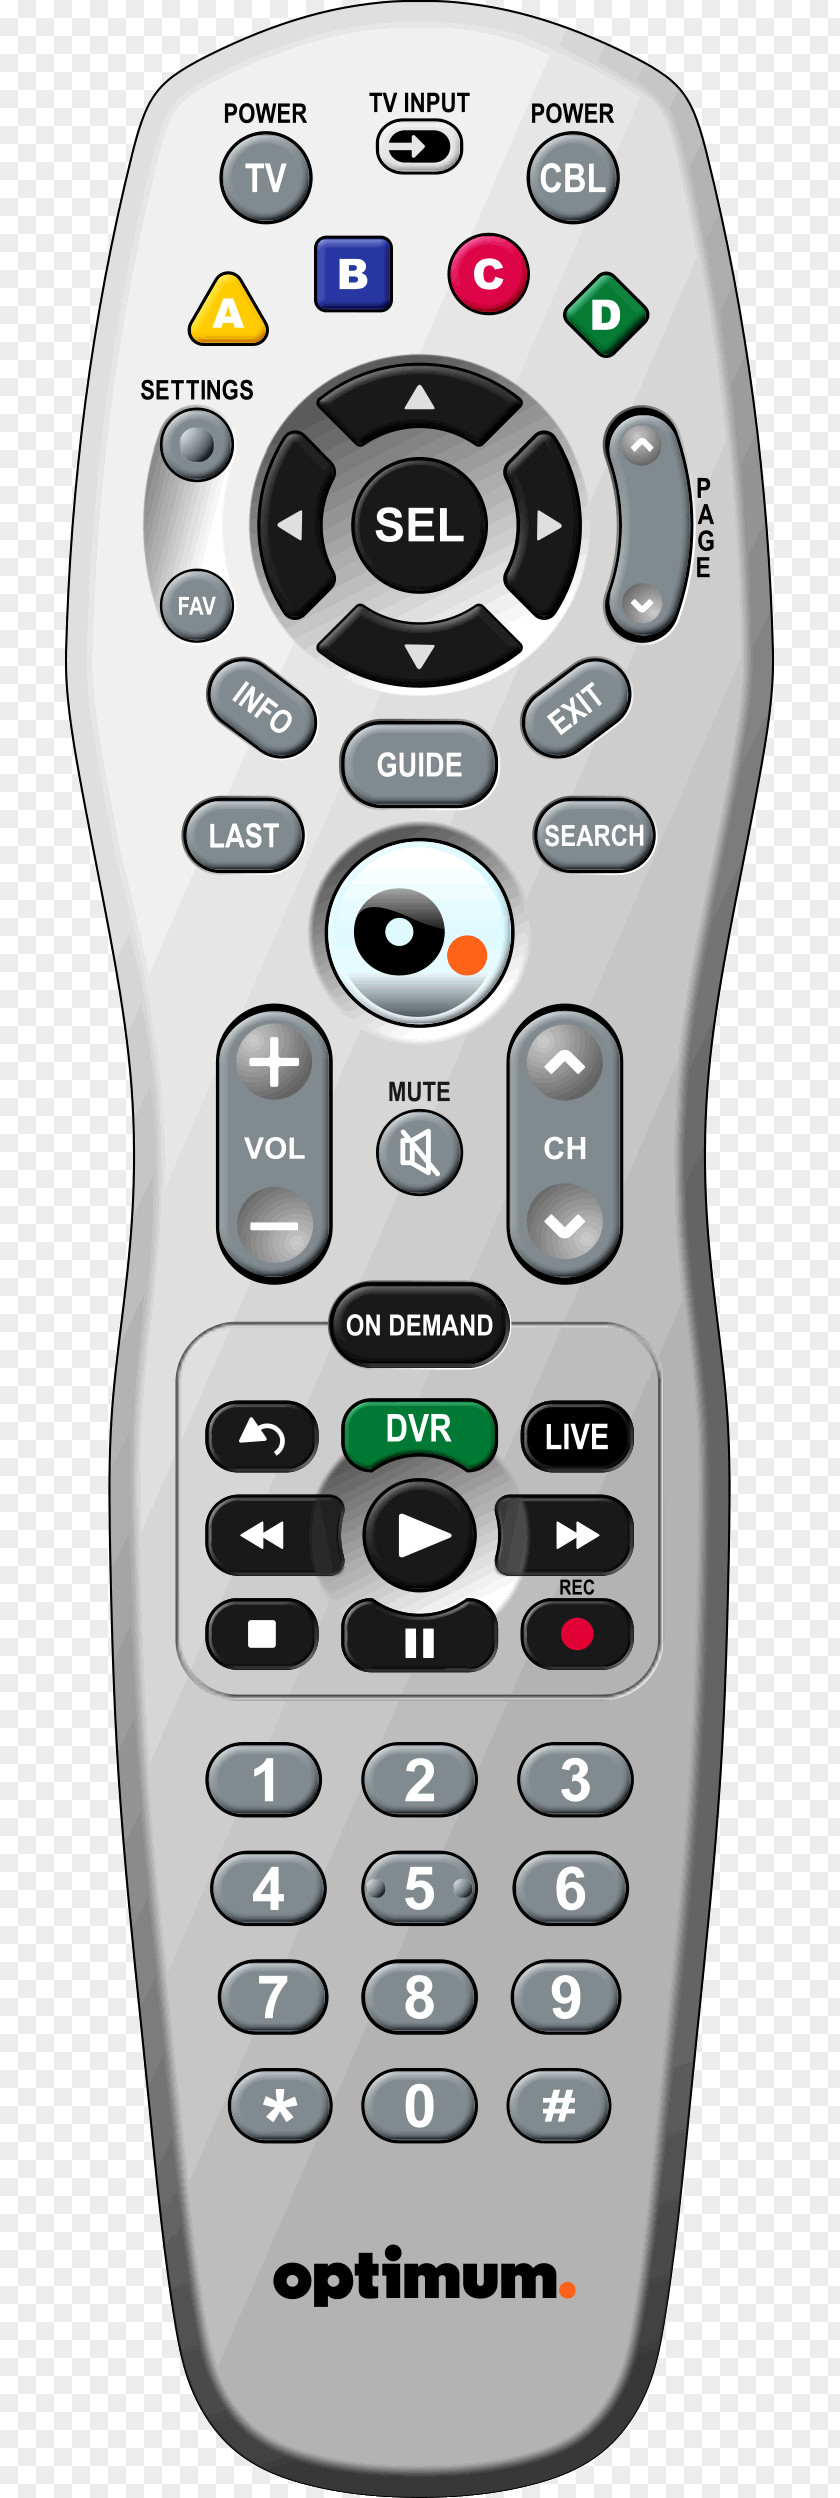 MR500 For 2014 Series Smart TV Browser Wheel Easy Web Site Search. With The Ingeniously Inventive LGTV REMOTE Remote Controls Universal Television Electronics Brand New LG Magic Control An PNG